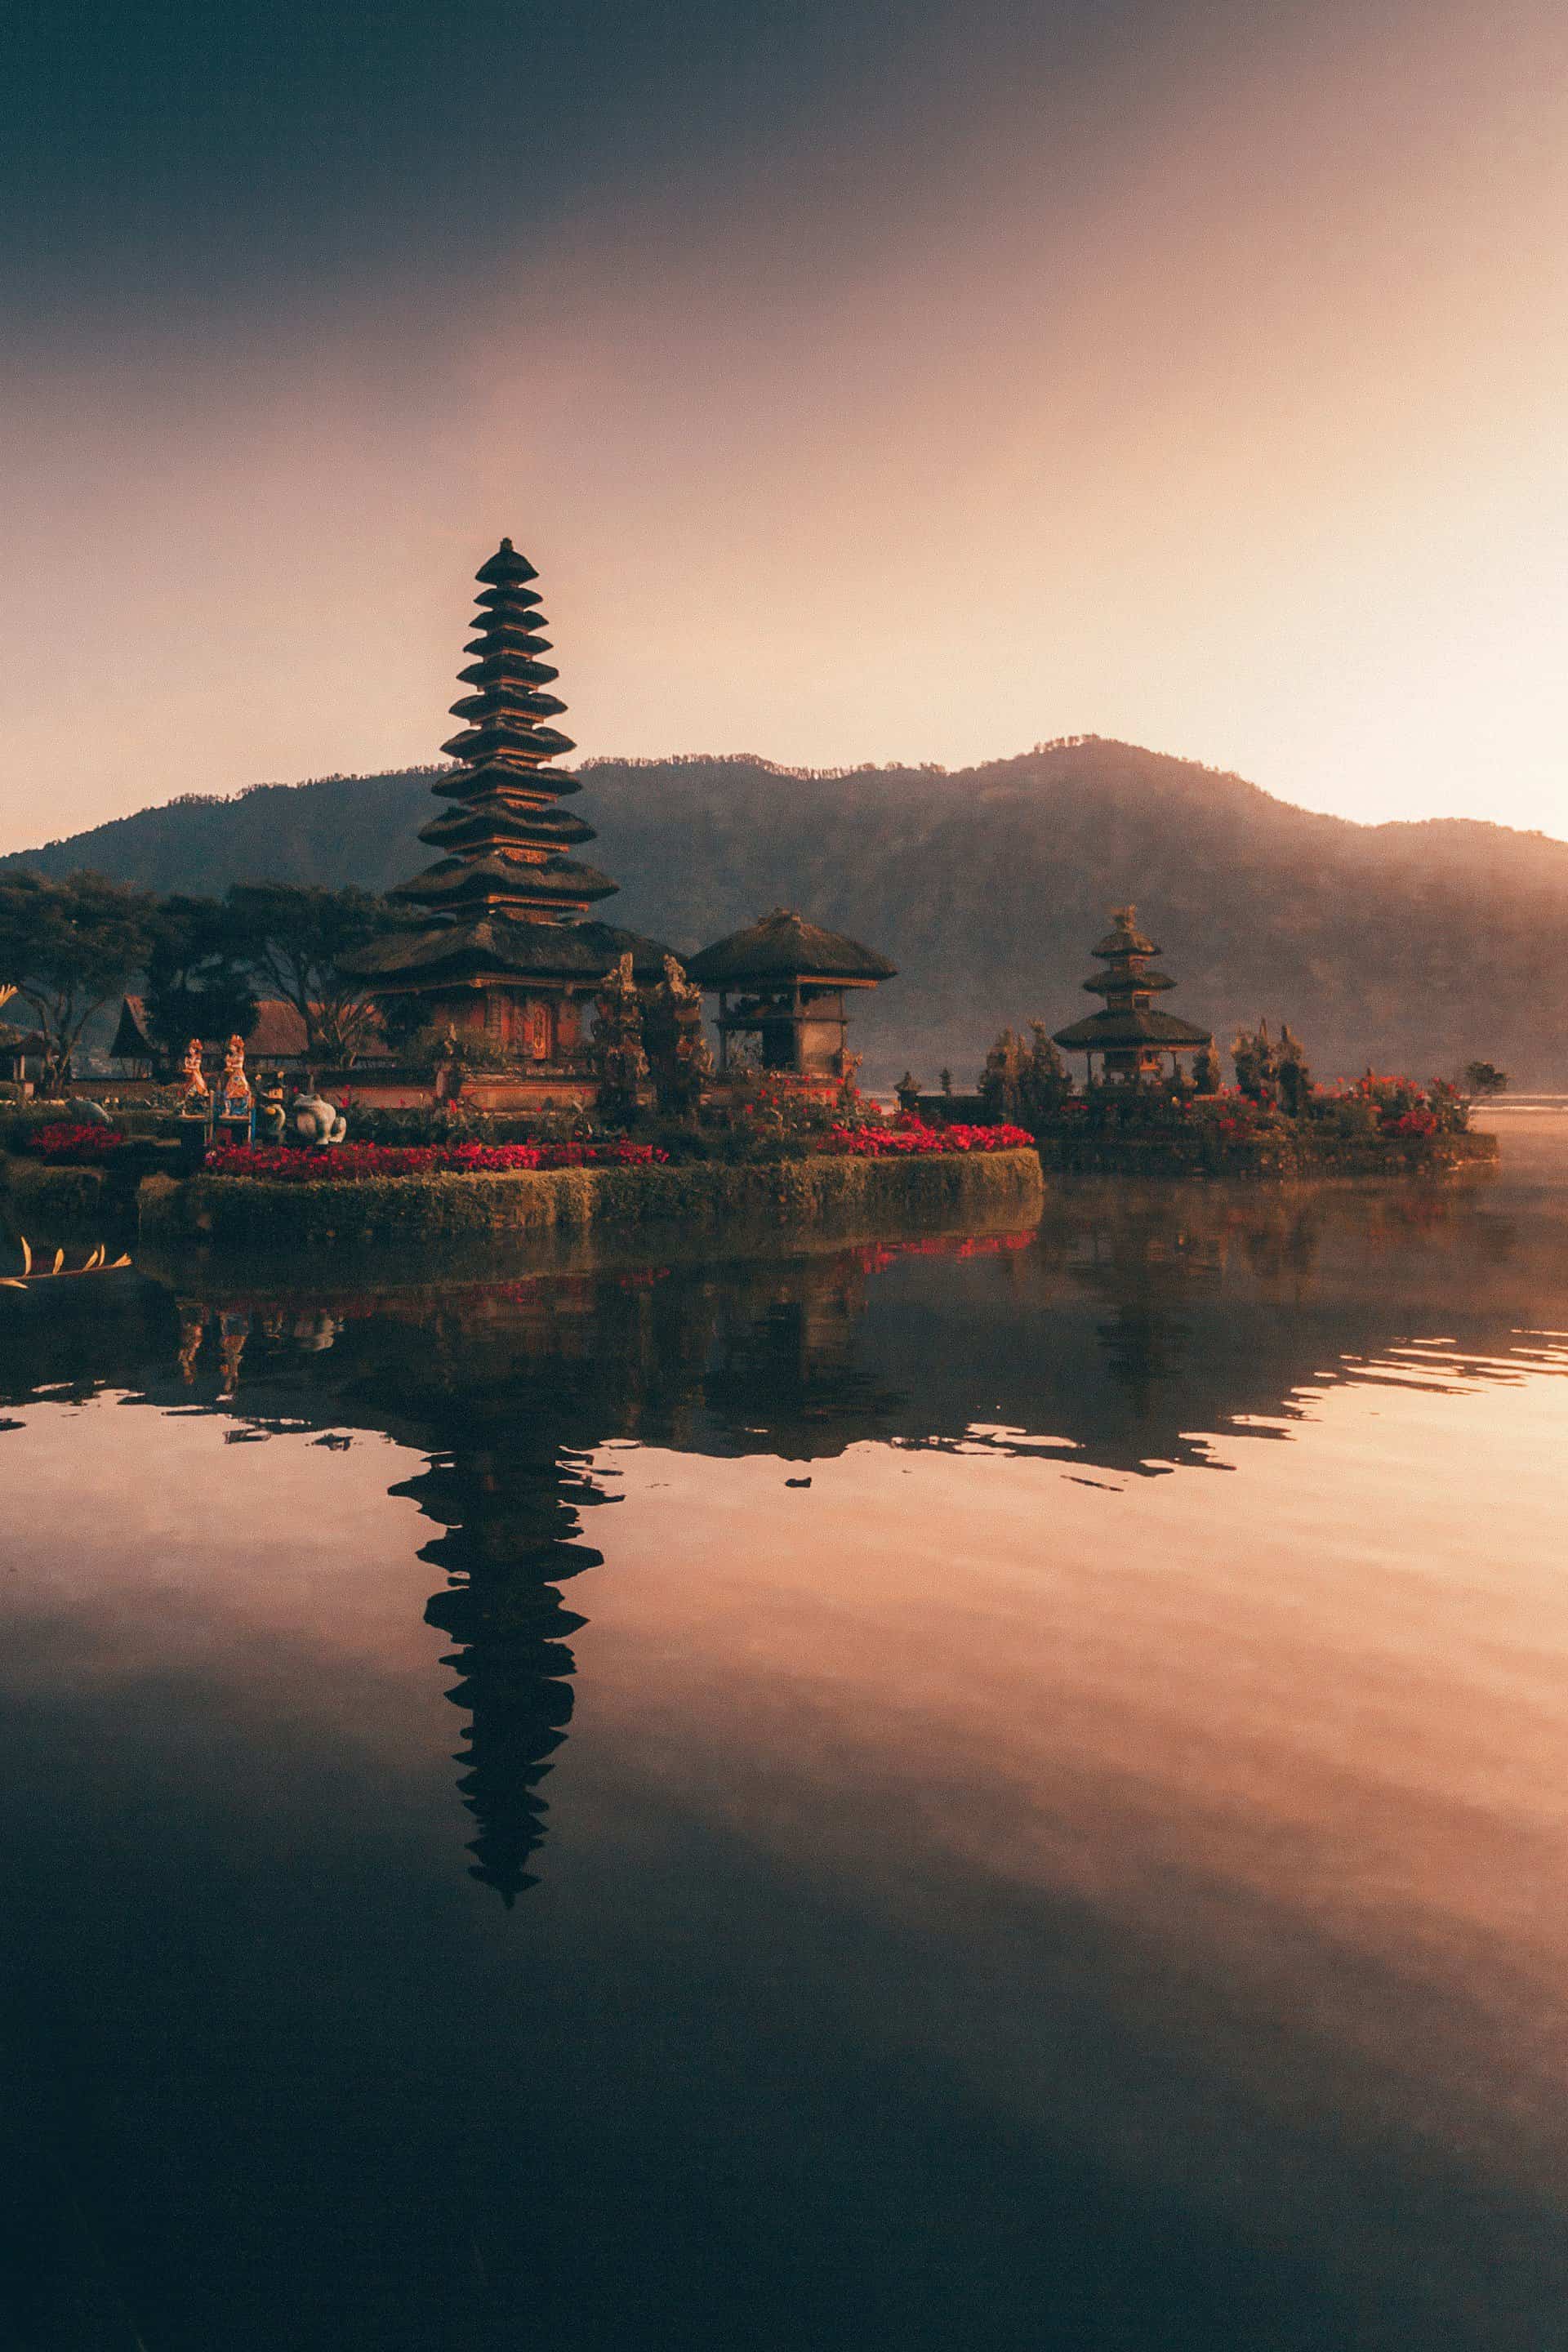 Temple at sunset in Bali, Indonesia